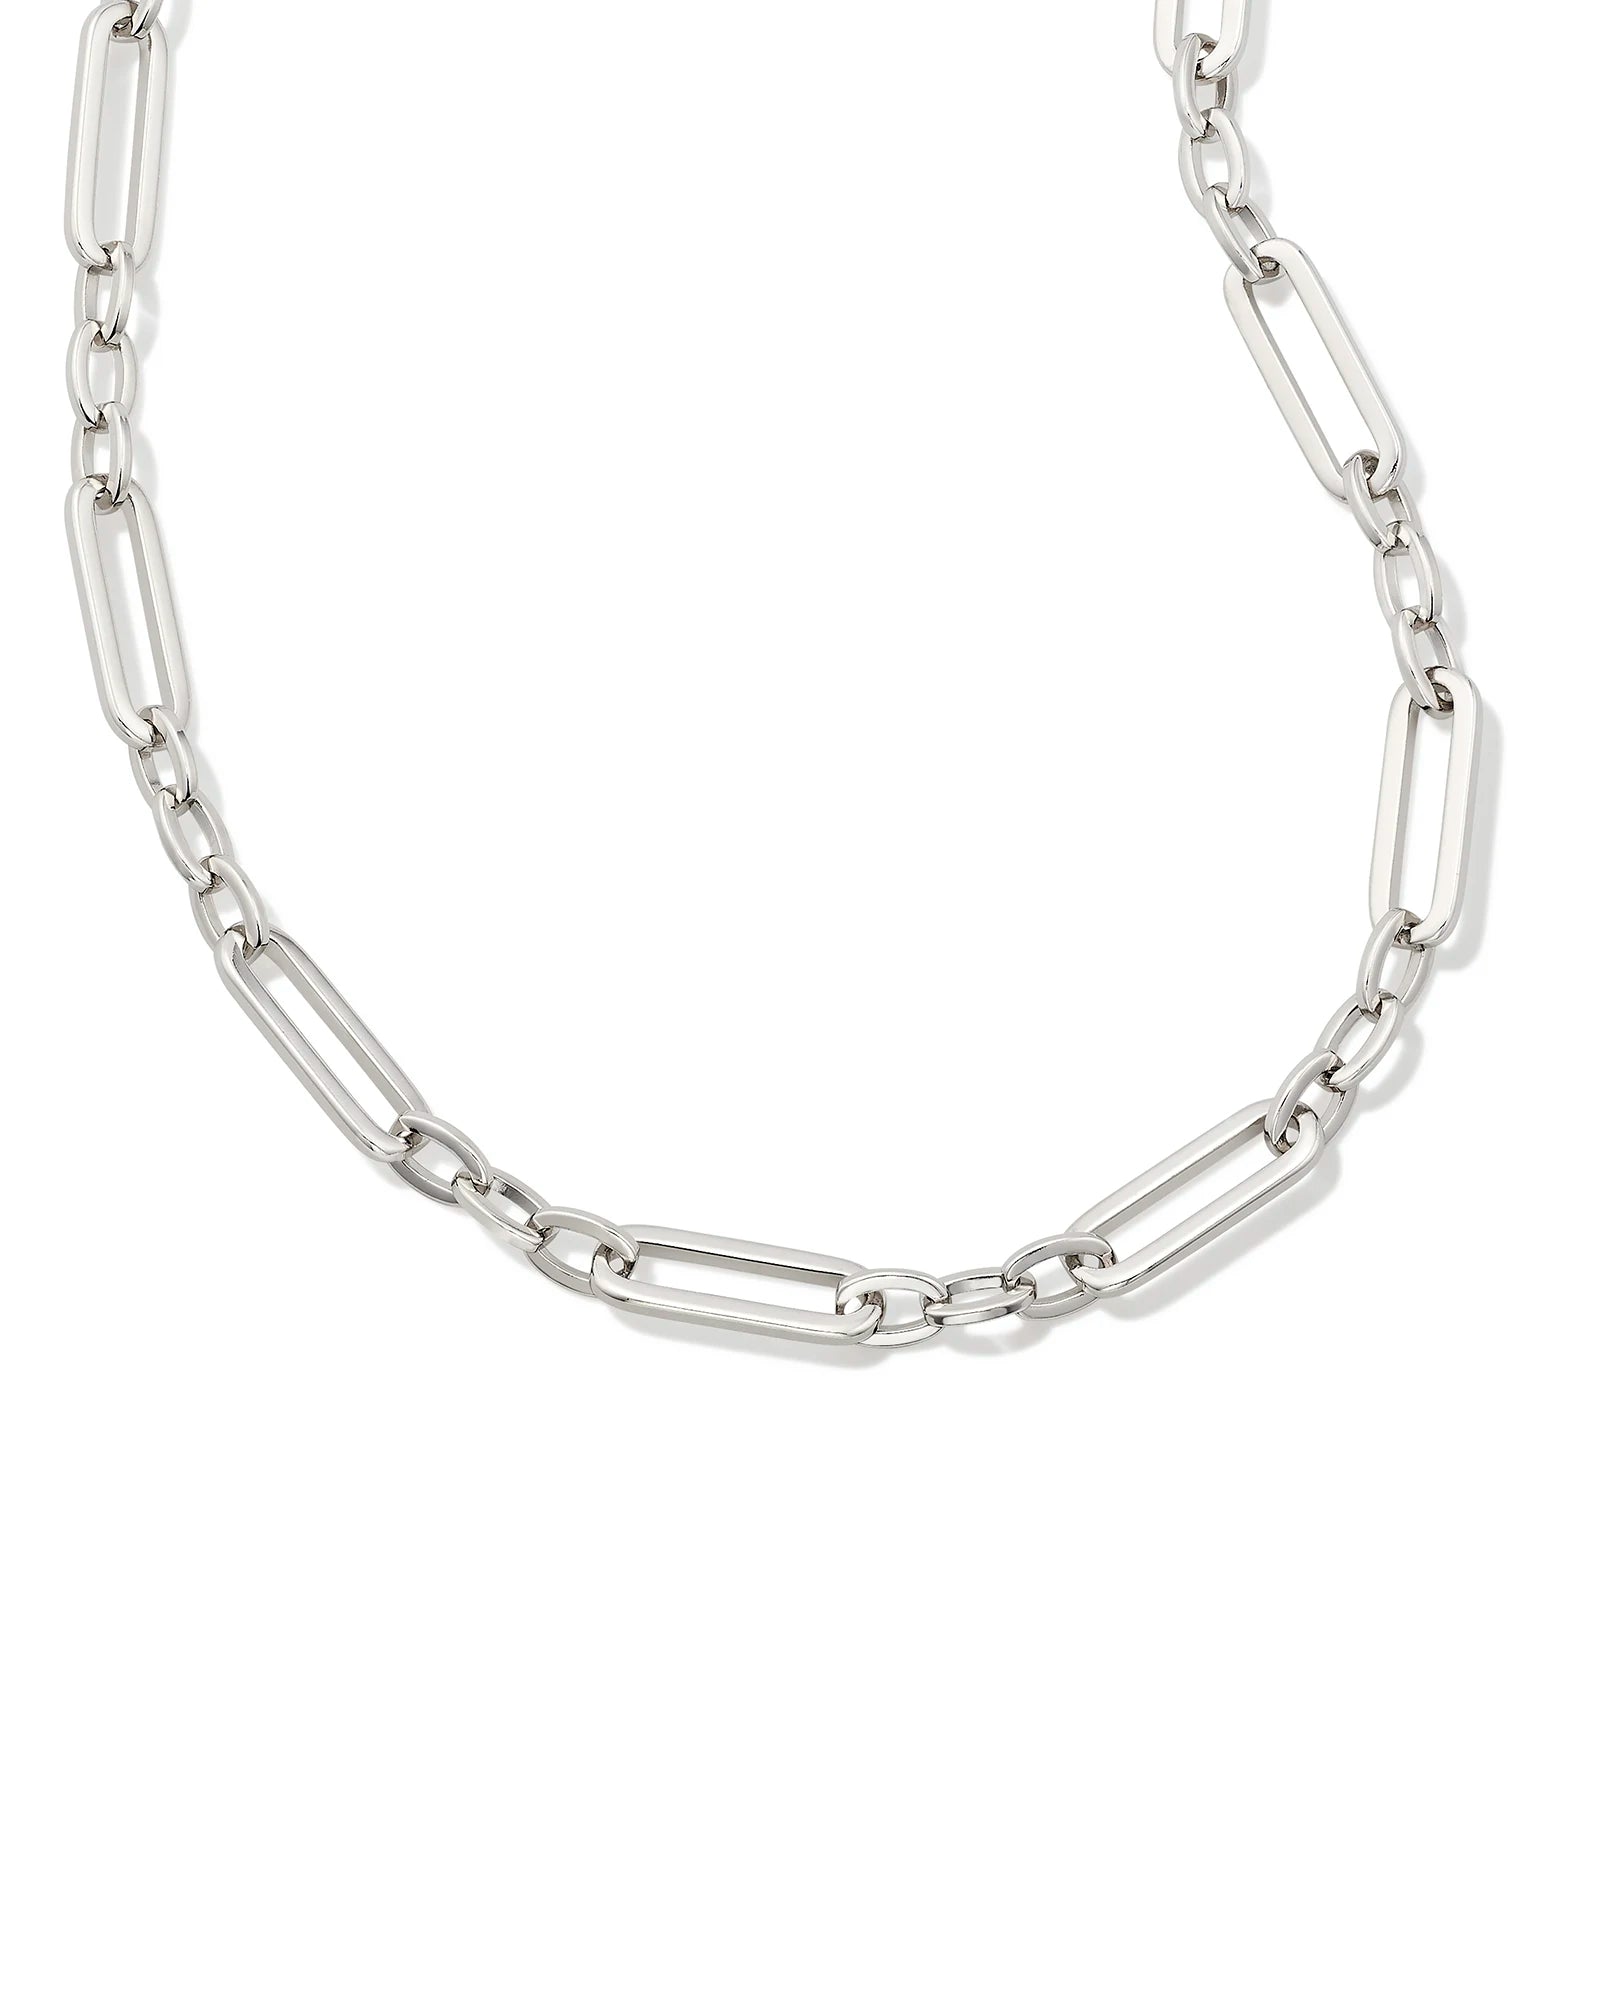 Kendra Scott Heather Link And Chain Necklace in Silver